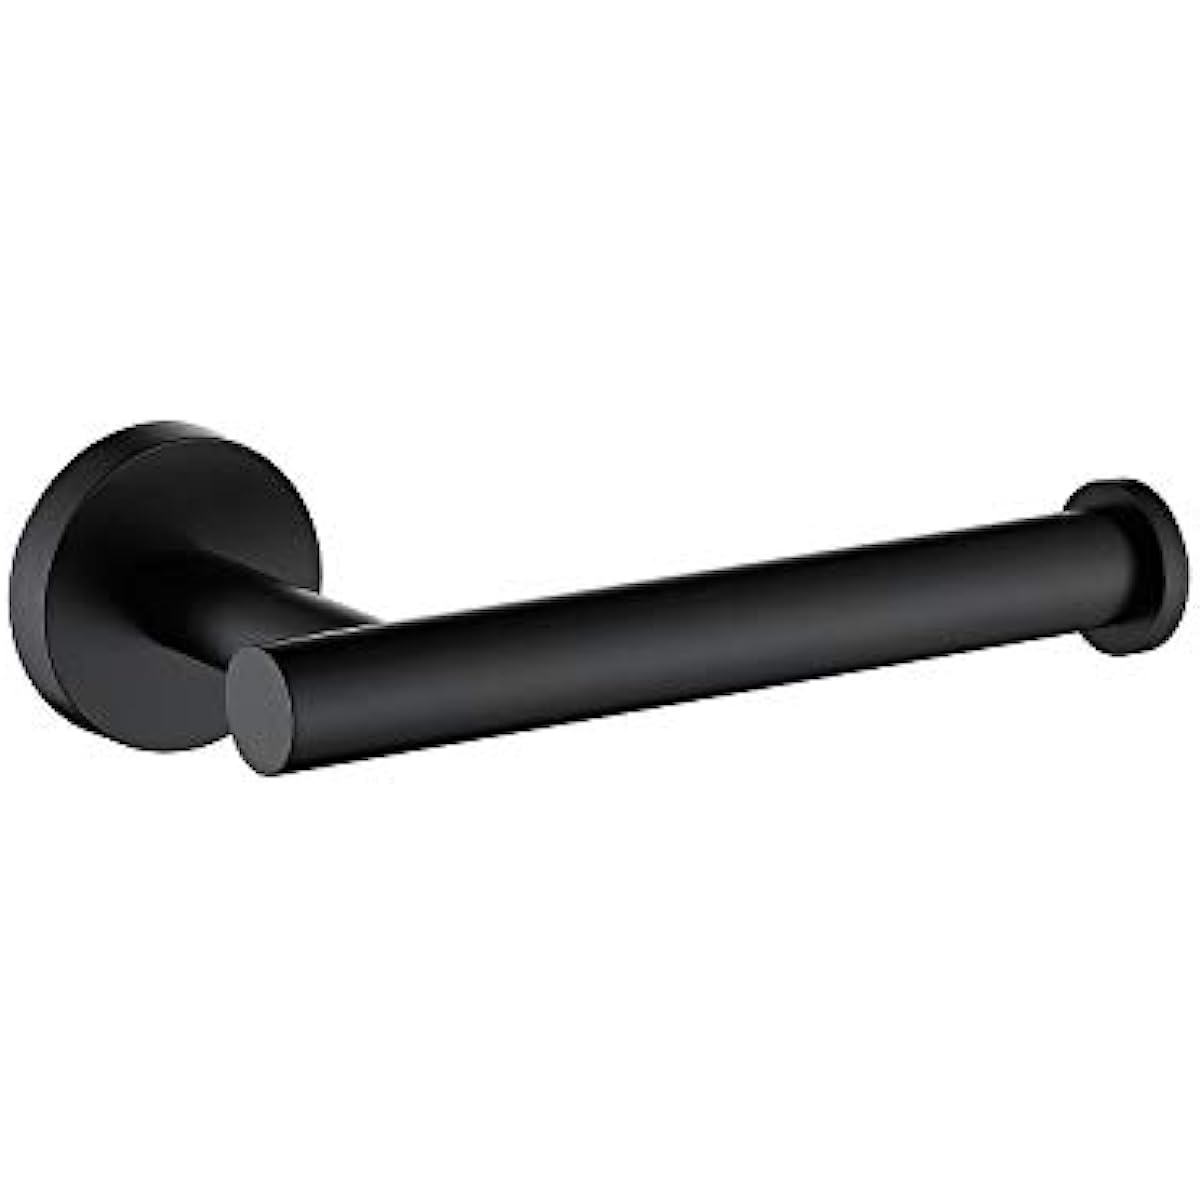 Stainless Steel Vertical Paper Towel Holder Wall Hooks Decorative Black  Paper Towels Toilet Papers Holder Wall Mount Kitchen Paper Holder Abs